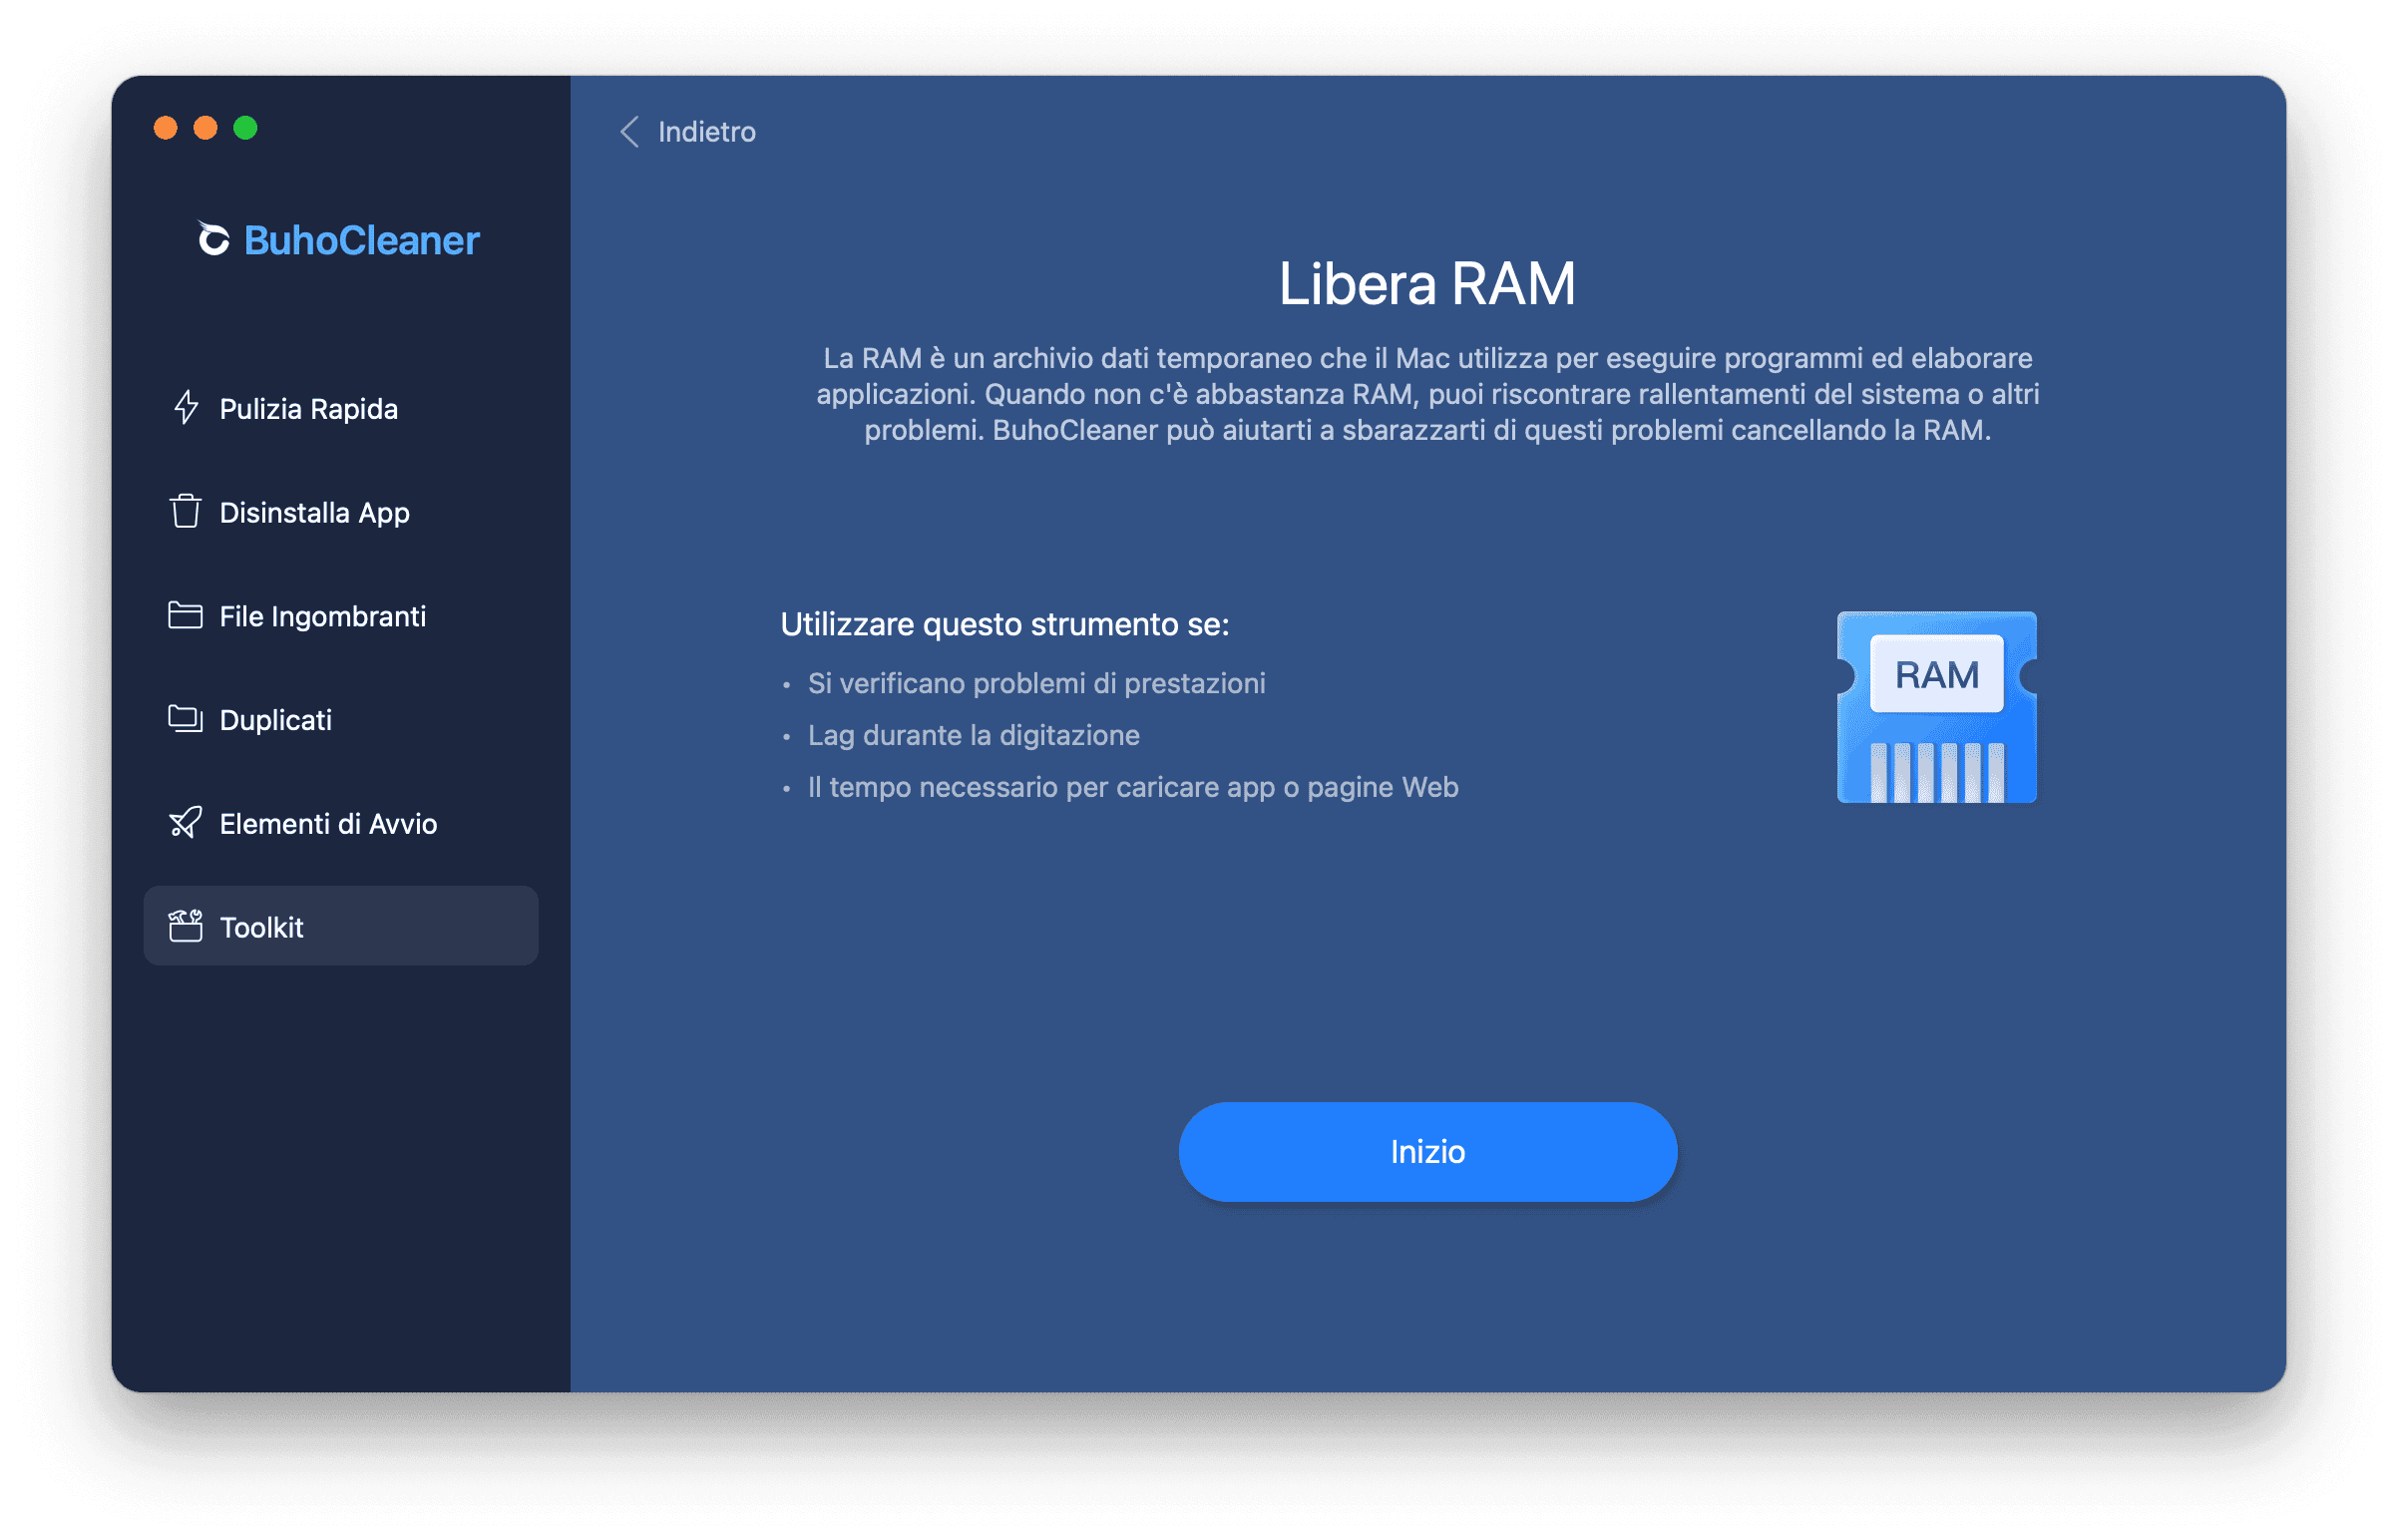 Free Up RAM with BuhoCleaner